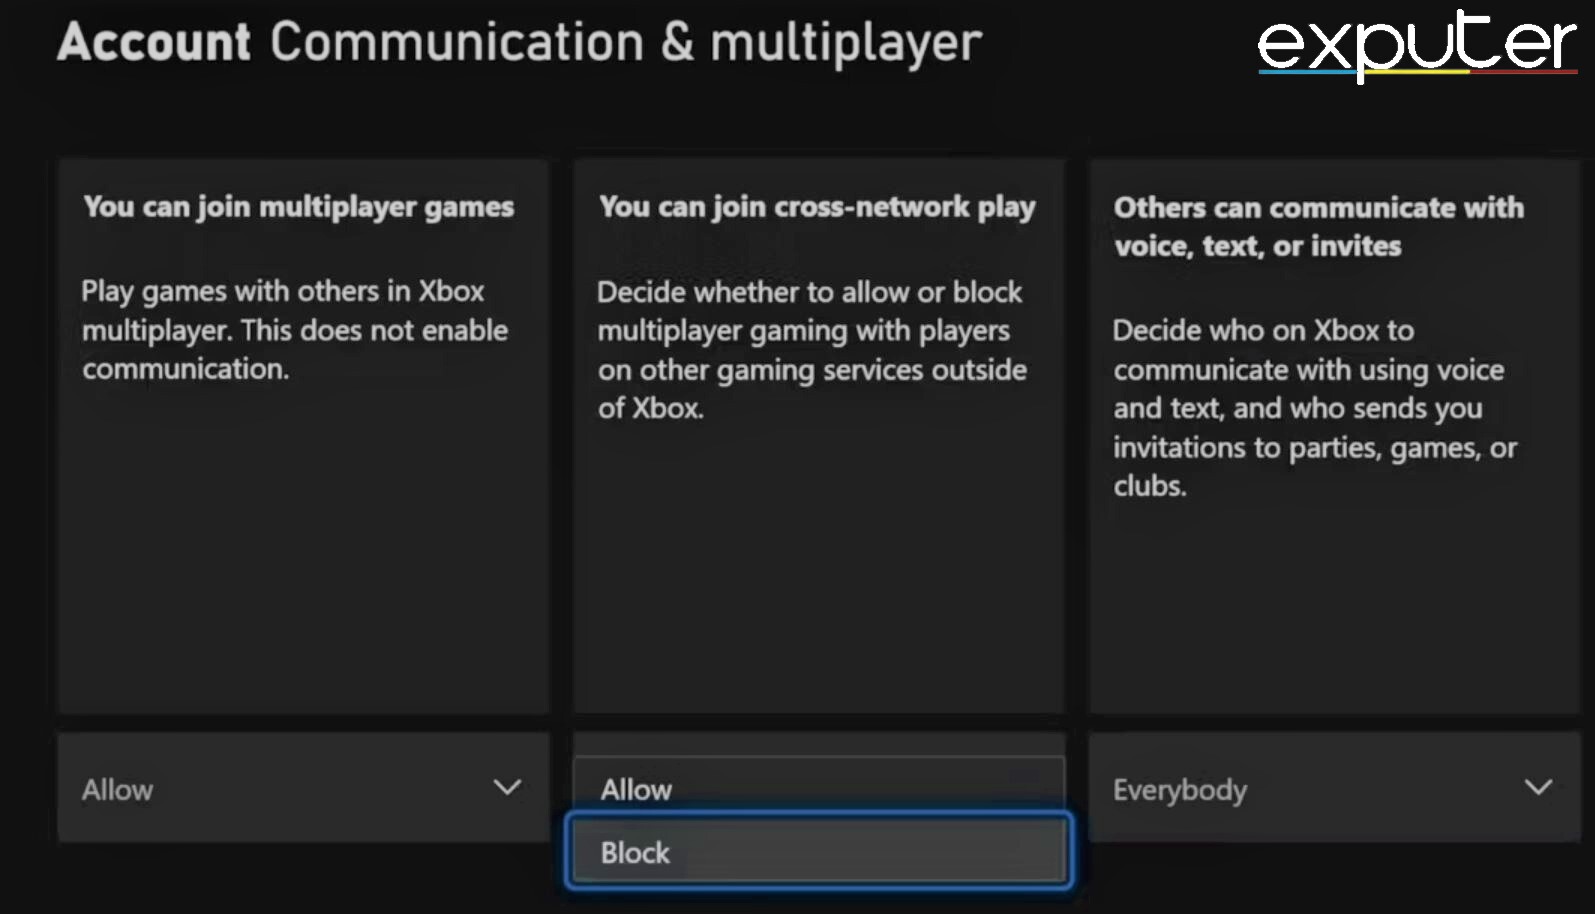 How to turn off crossplay on Call of Duty 2022 Moder Warefare 2 Xbox 